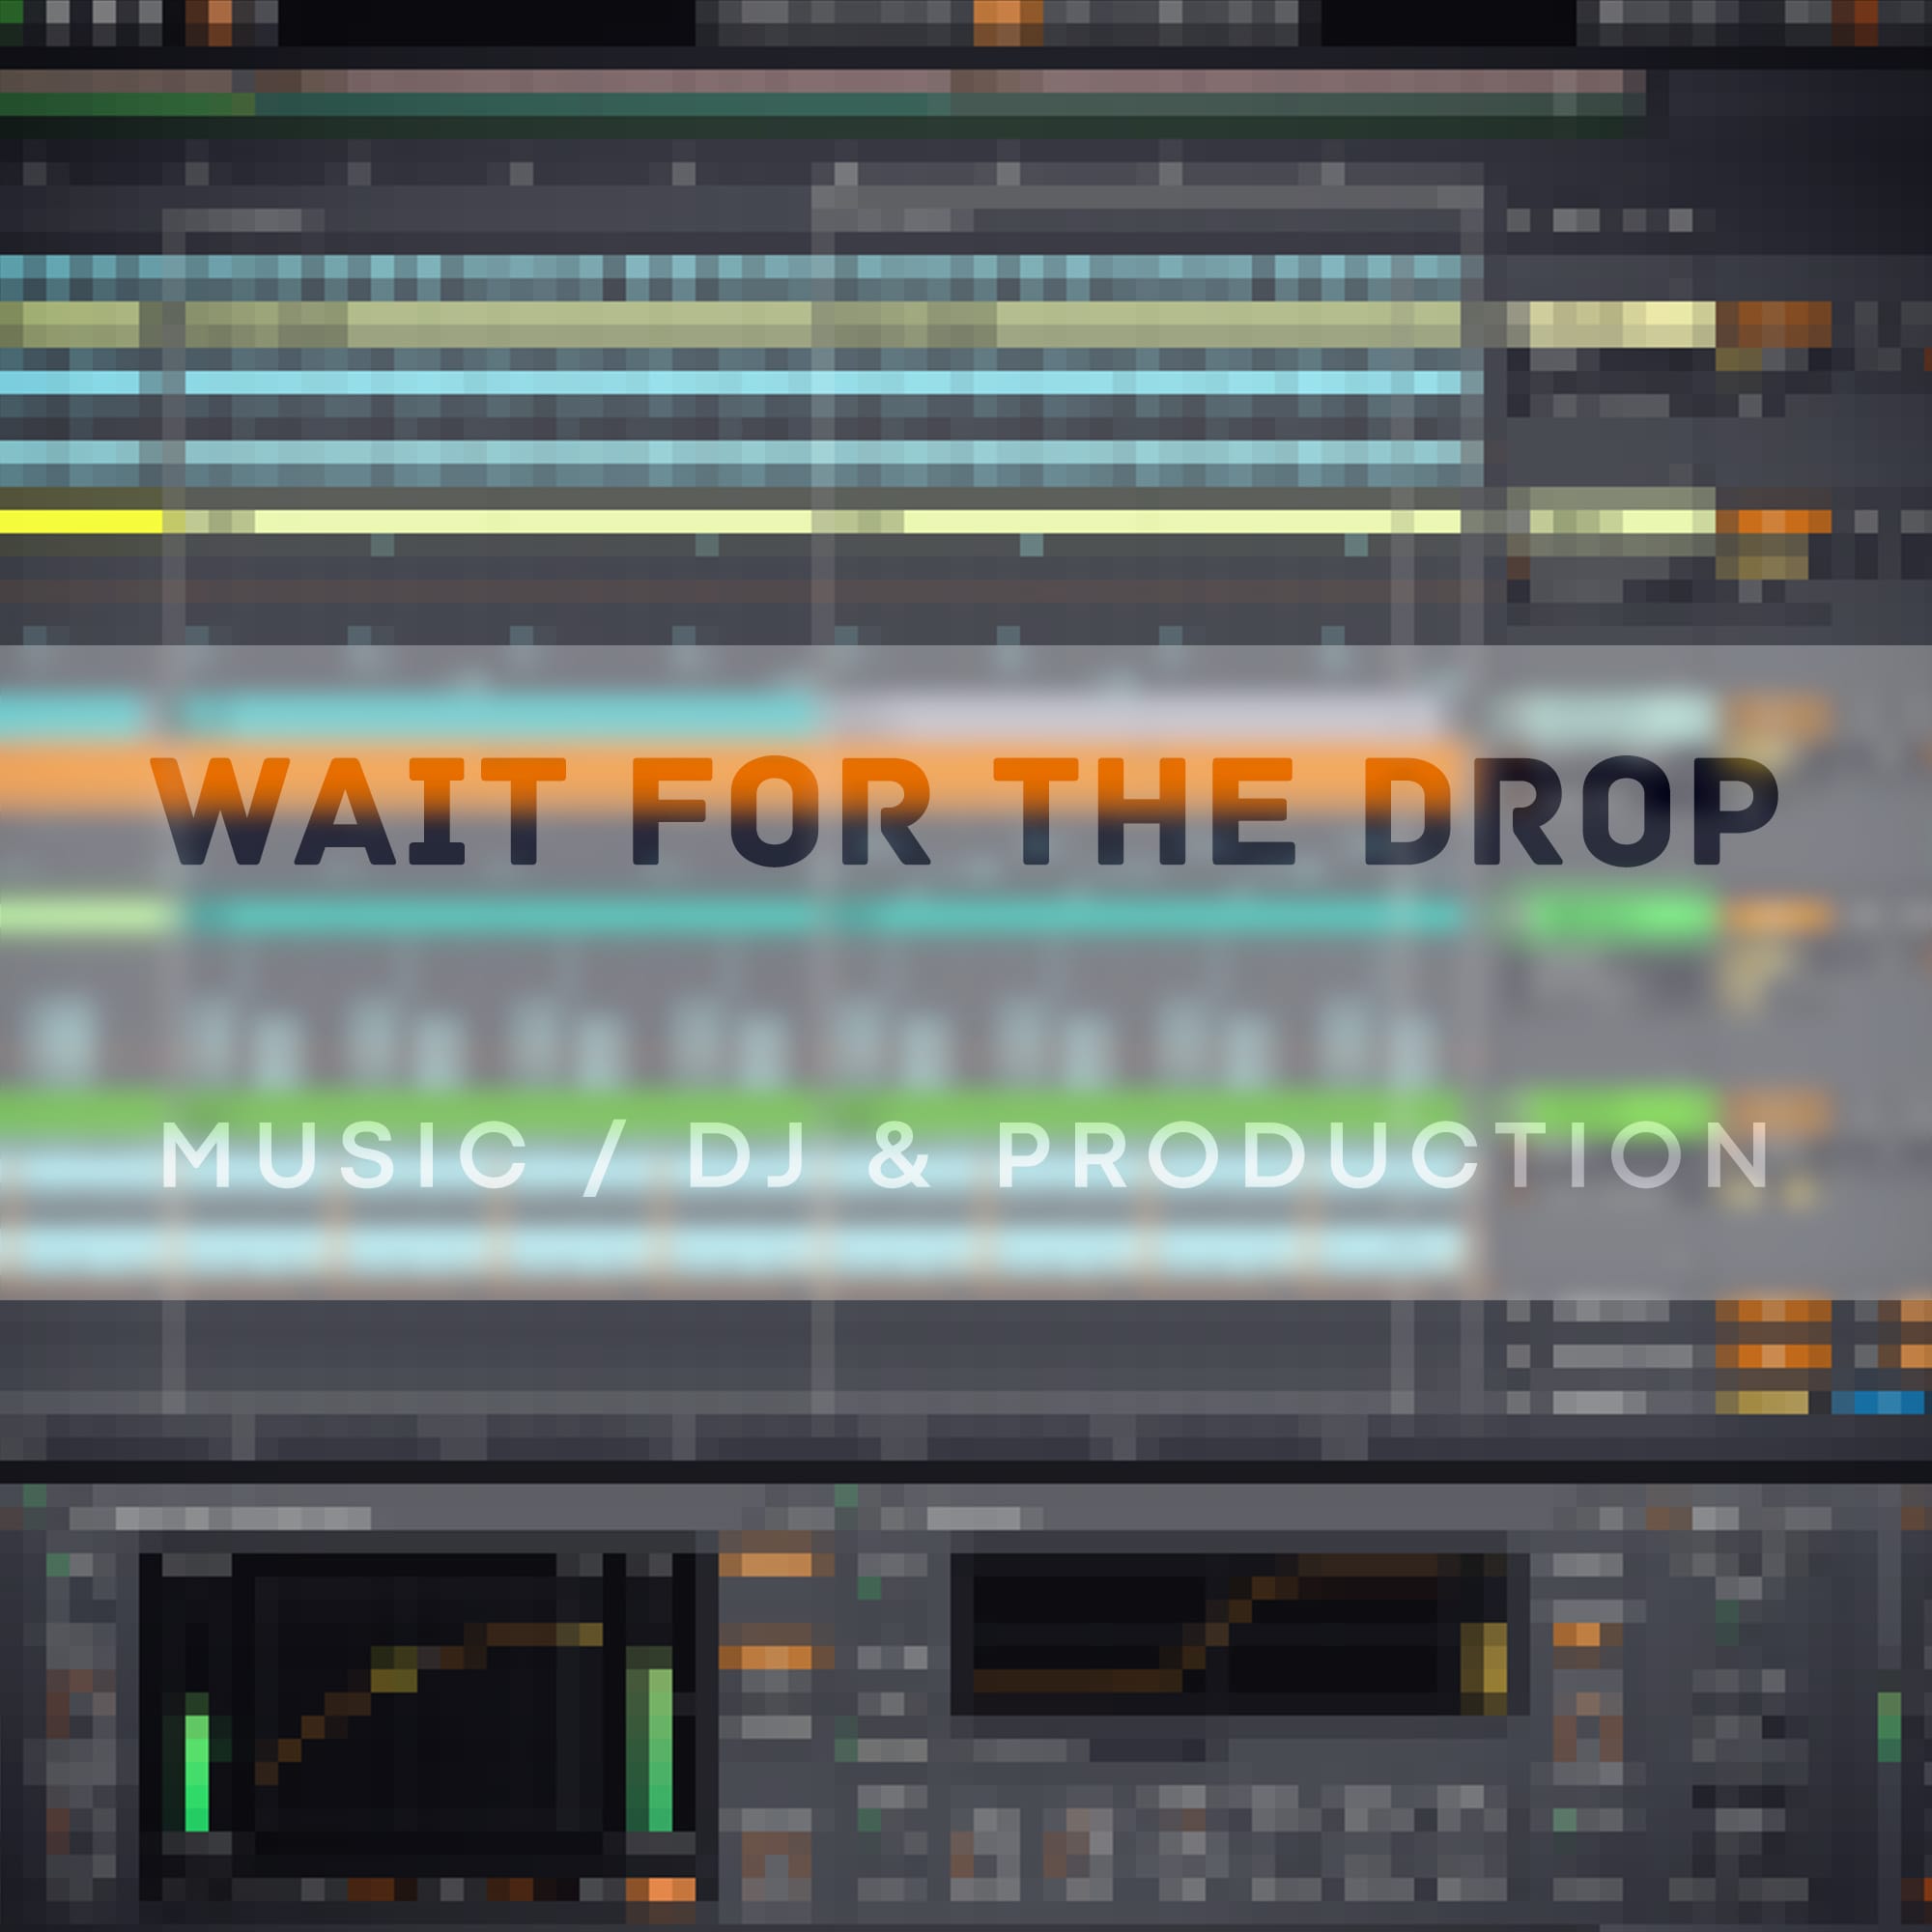 Wait for the drop – Music